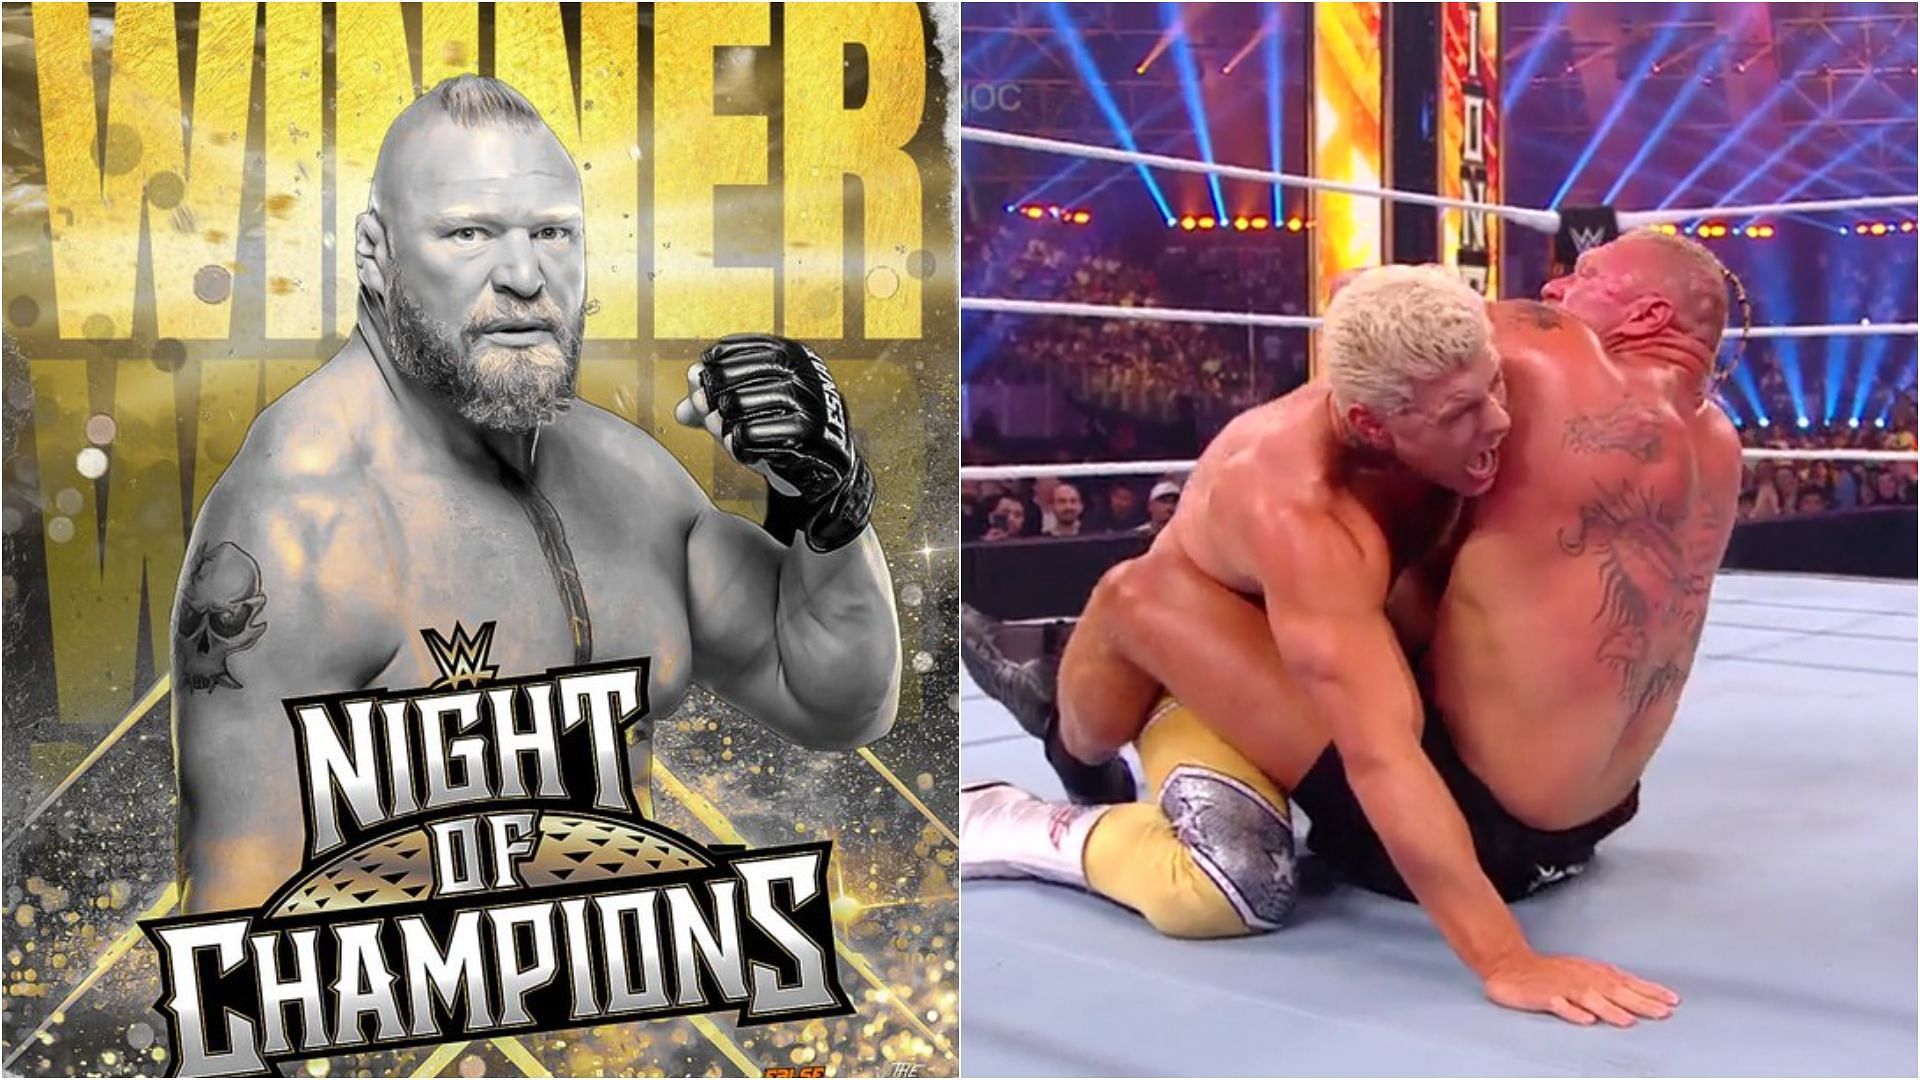 The Beast got his revenge against The American Nightmare at Night of Champions